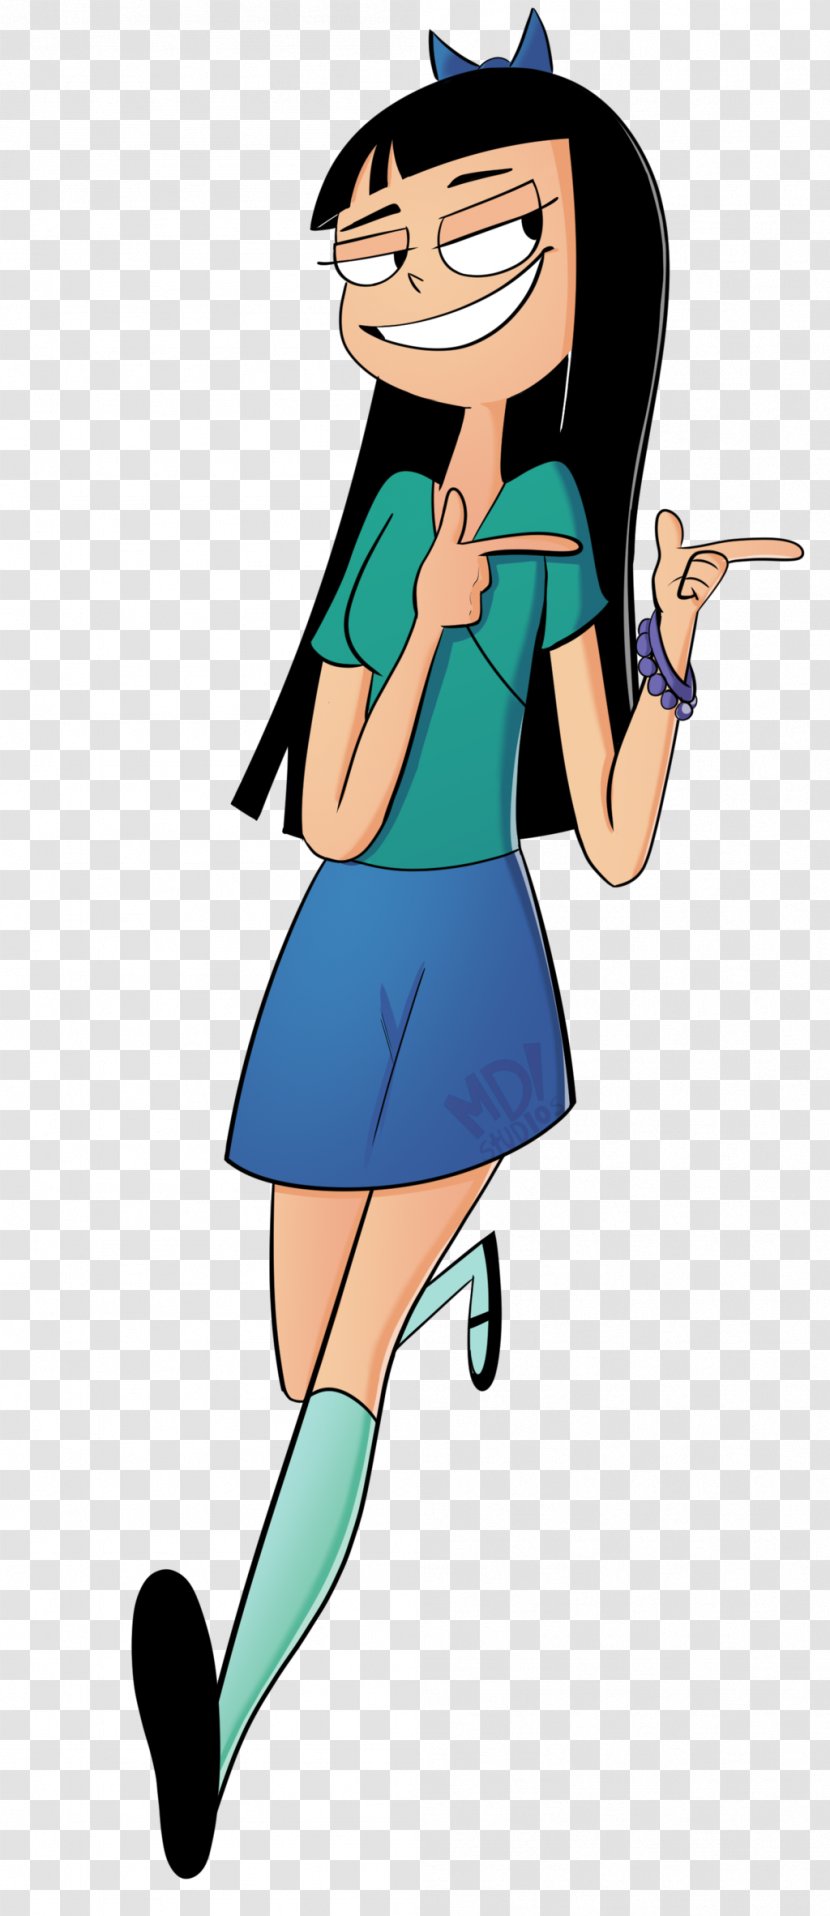 Stacy Hirano Phineas Flynn Candace Ferb Fletcher - Cartoon - Heart Transparent PNG